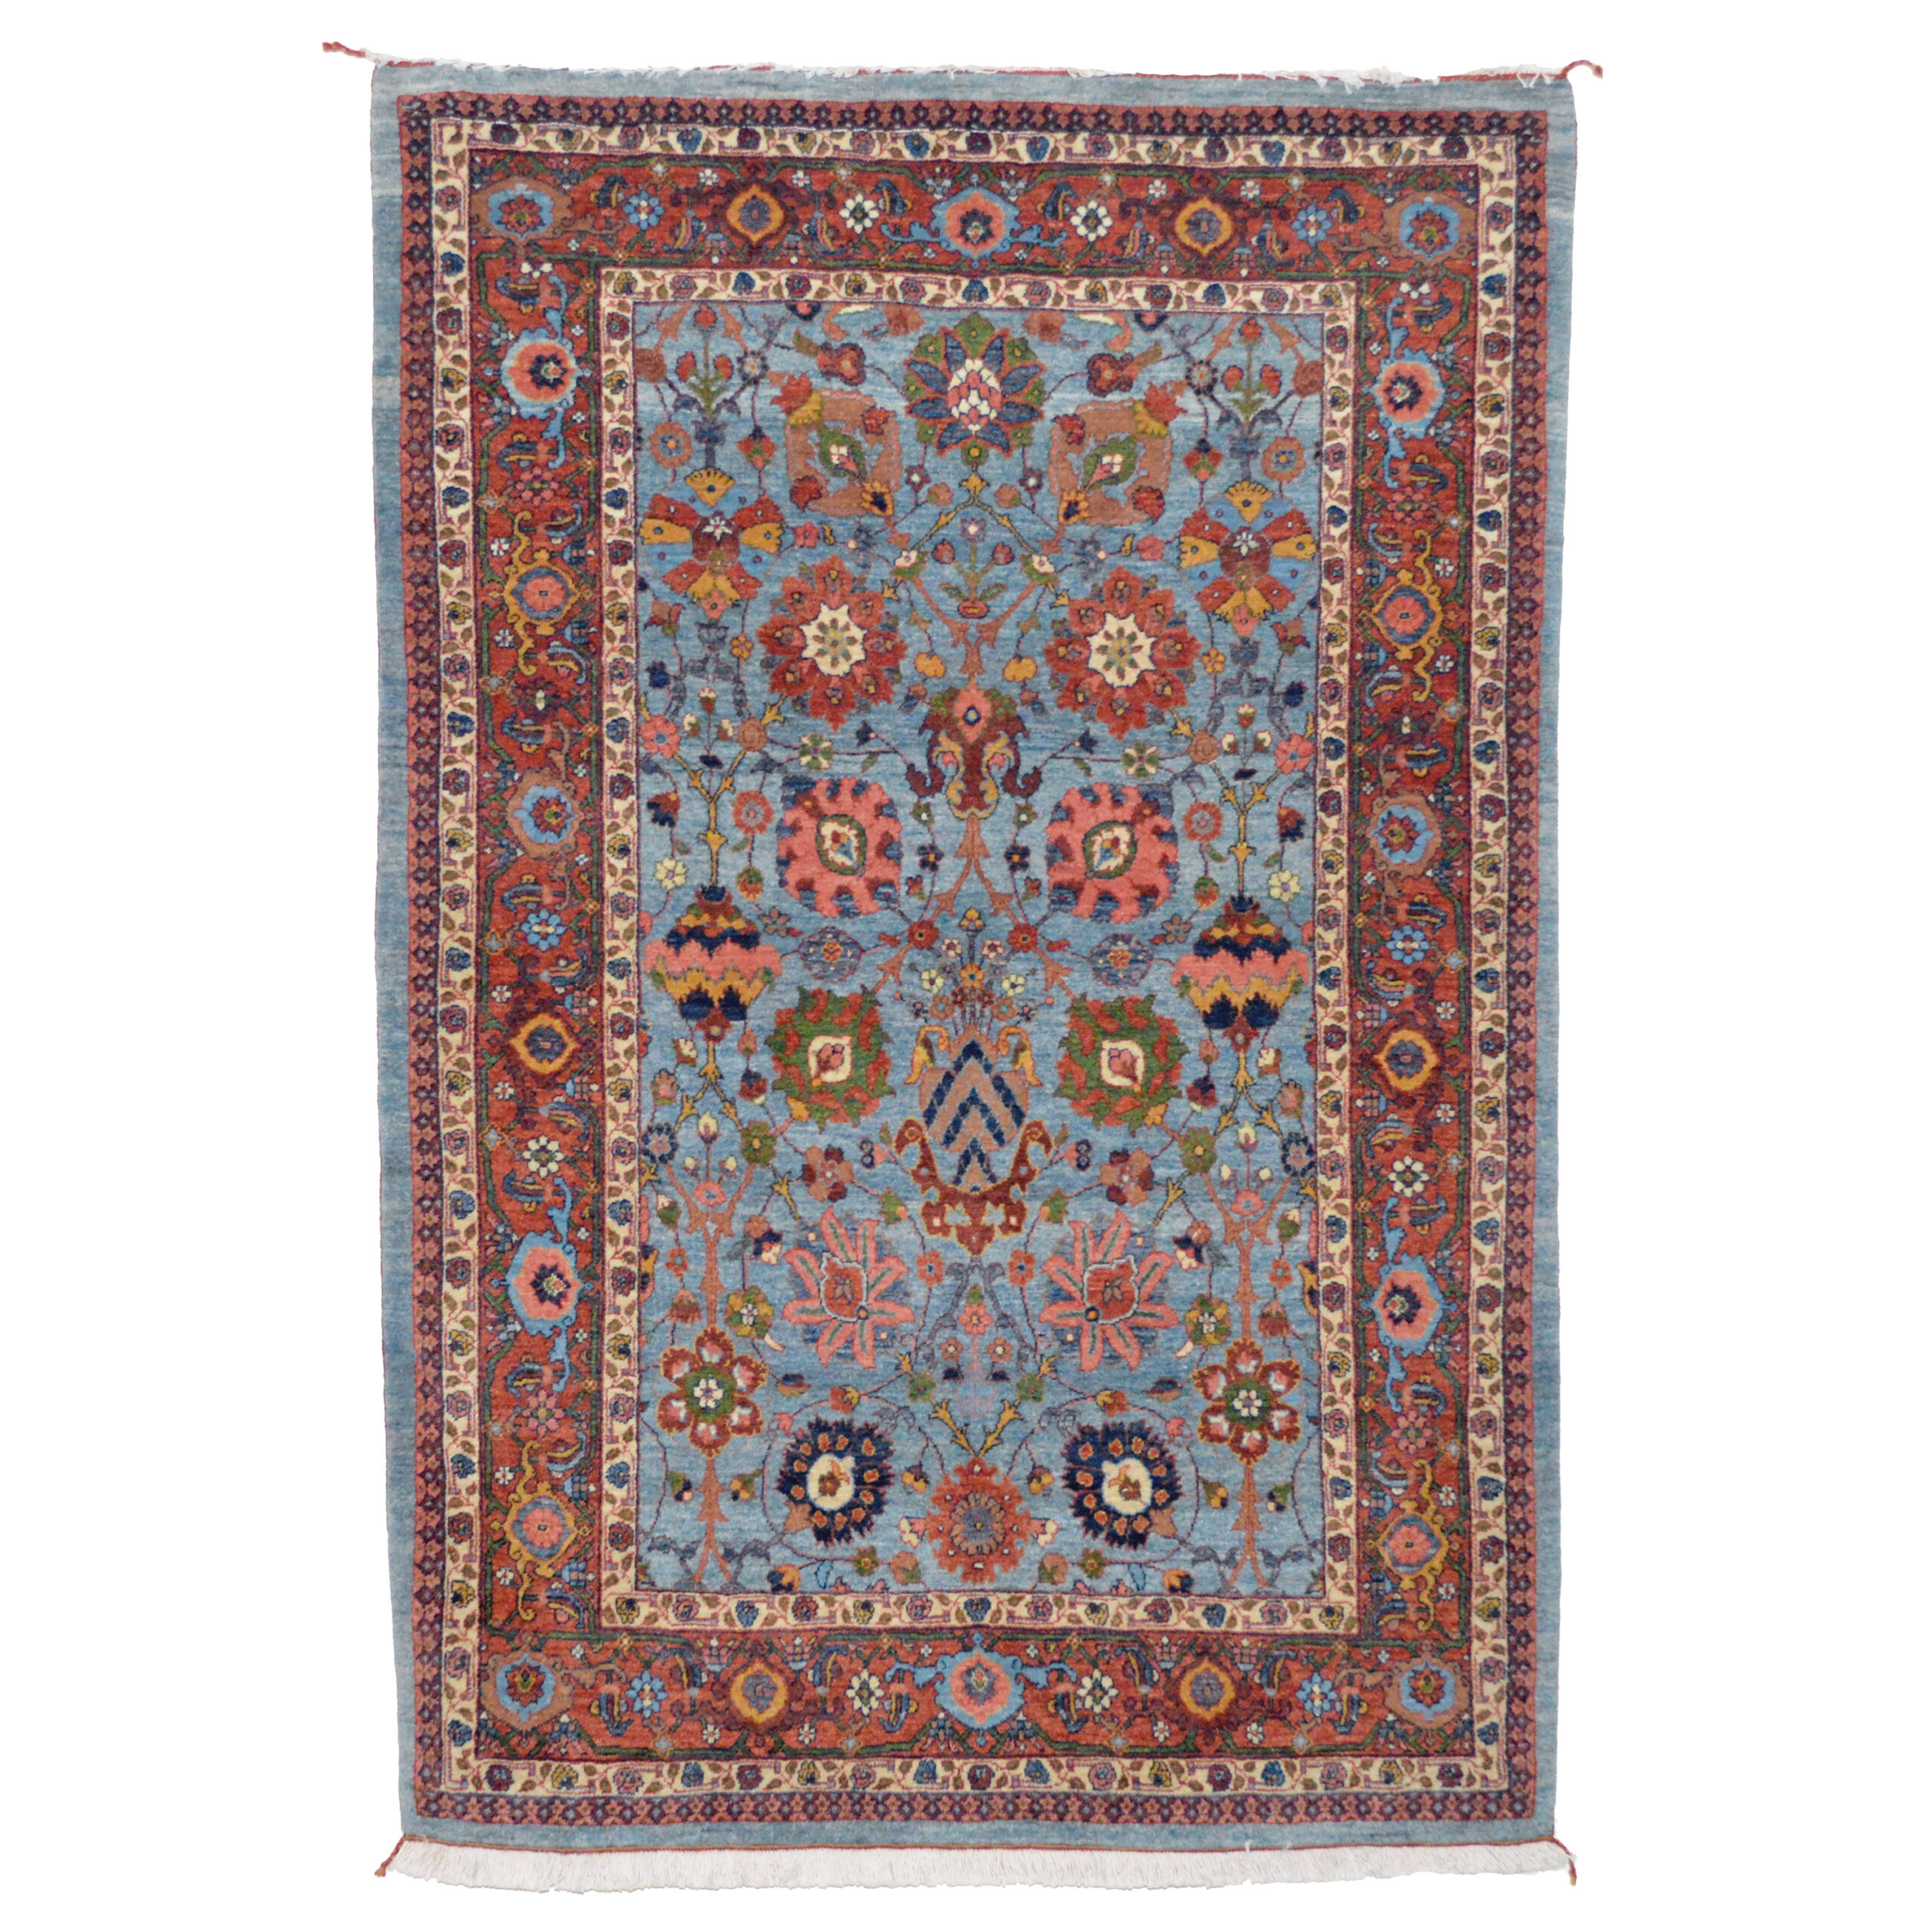 A very fine, new Bidjar rug with a classical Vase design on a deep sky blue field. Hand woven utilizing natural dyes and hand spun wool. Douglas Stock Gallery offers a selection of contemporary, hand woven Oriental rugs that utilize natural dyes and hand spun wool. Oriental rugs Boston,MA area.